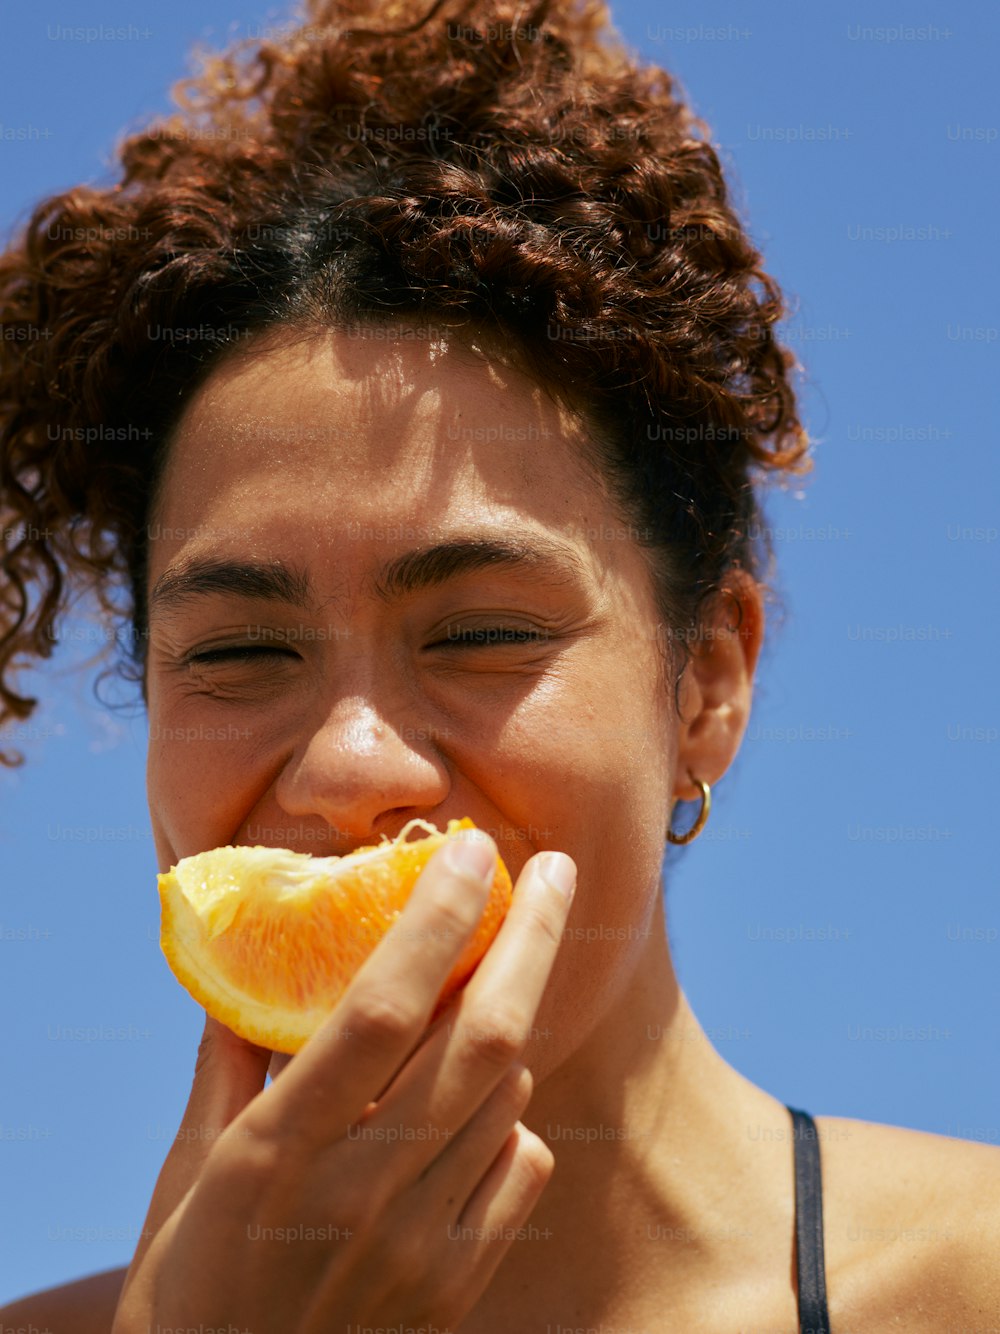 a woman eating an orange slice with a blue sky in the background